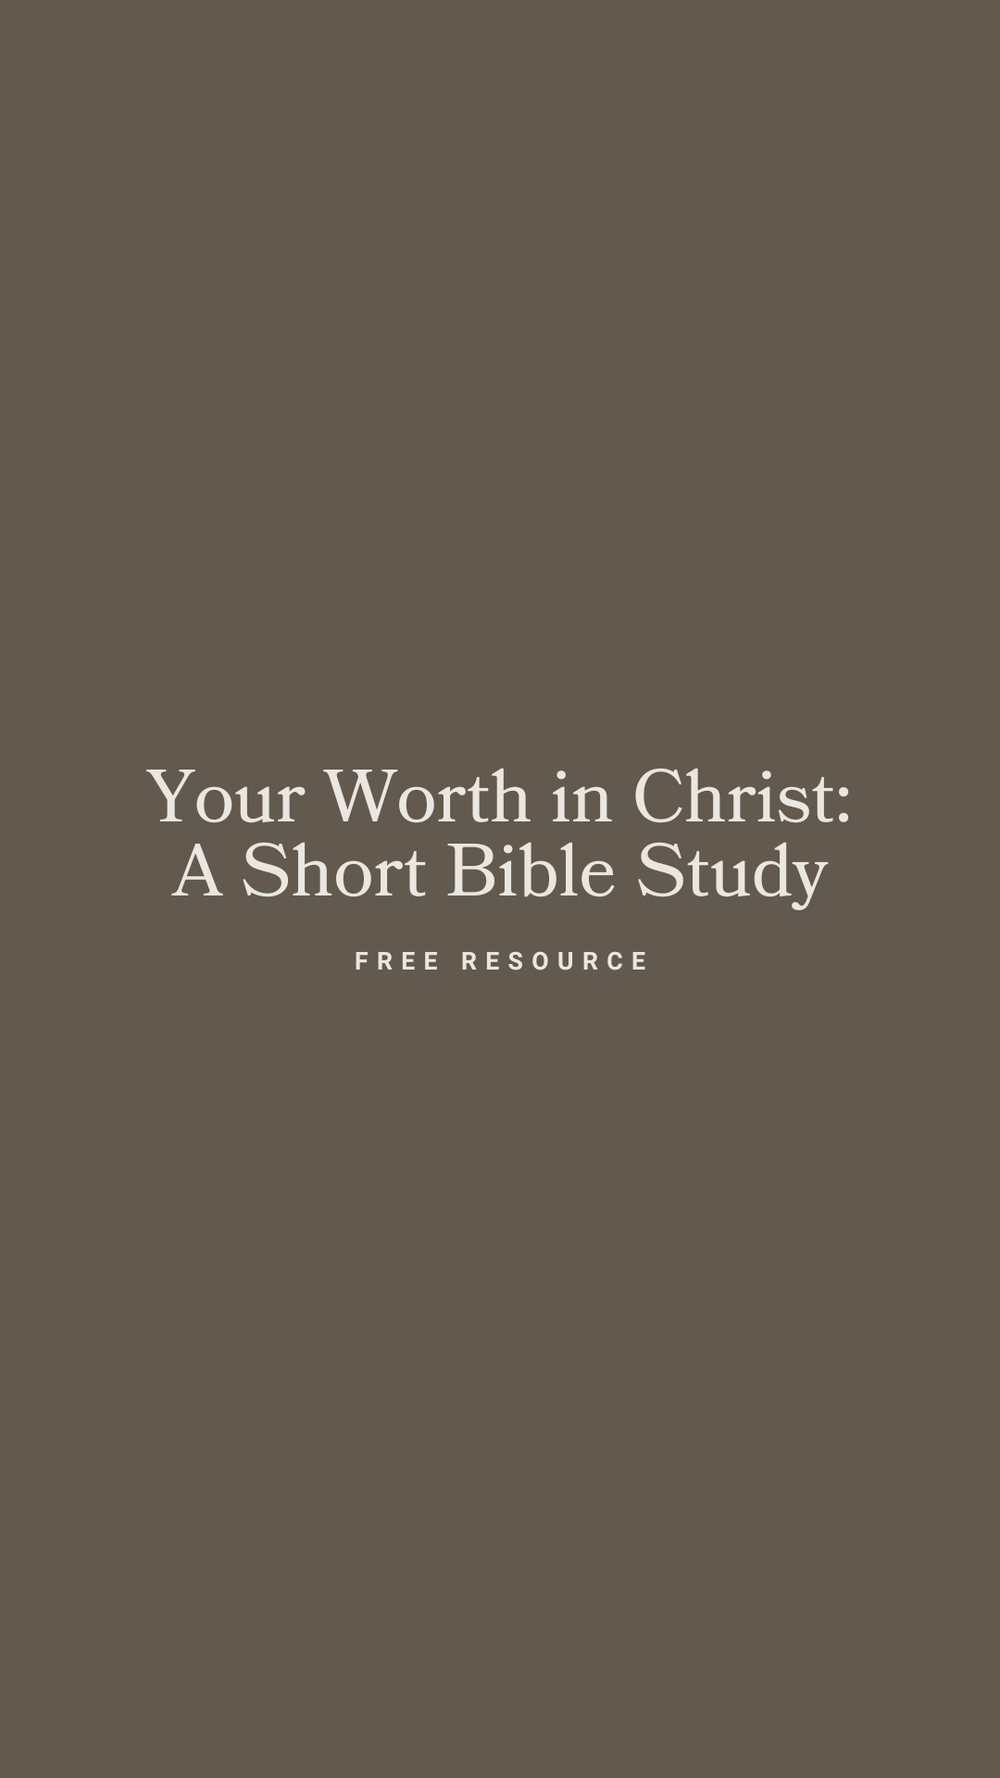 Your Worth in Christ Bible Study